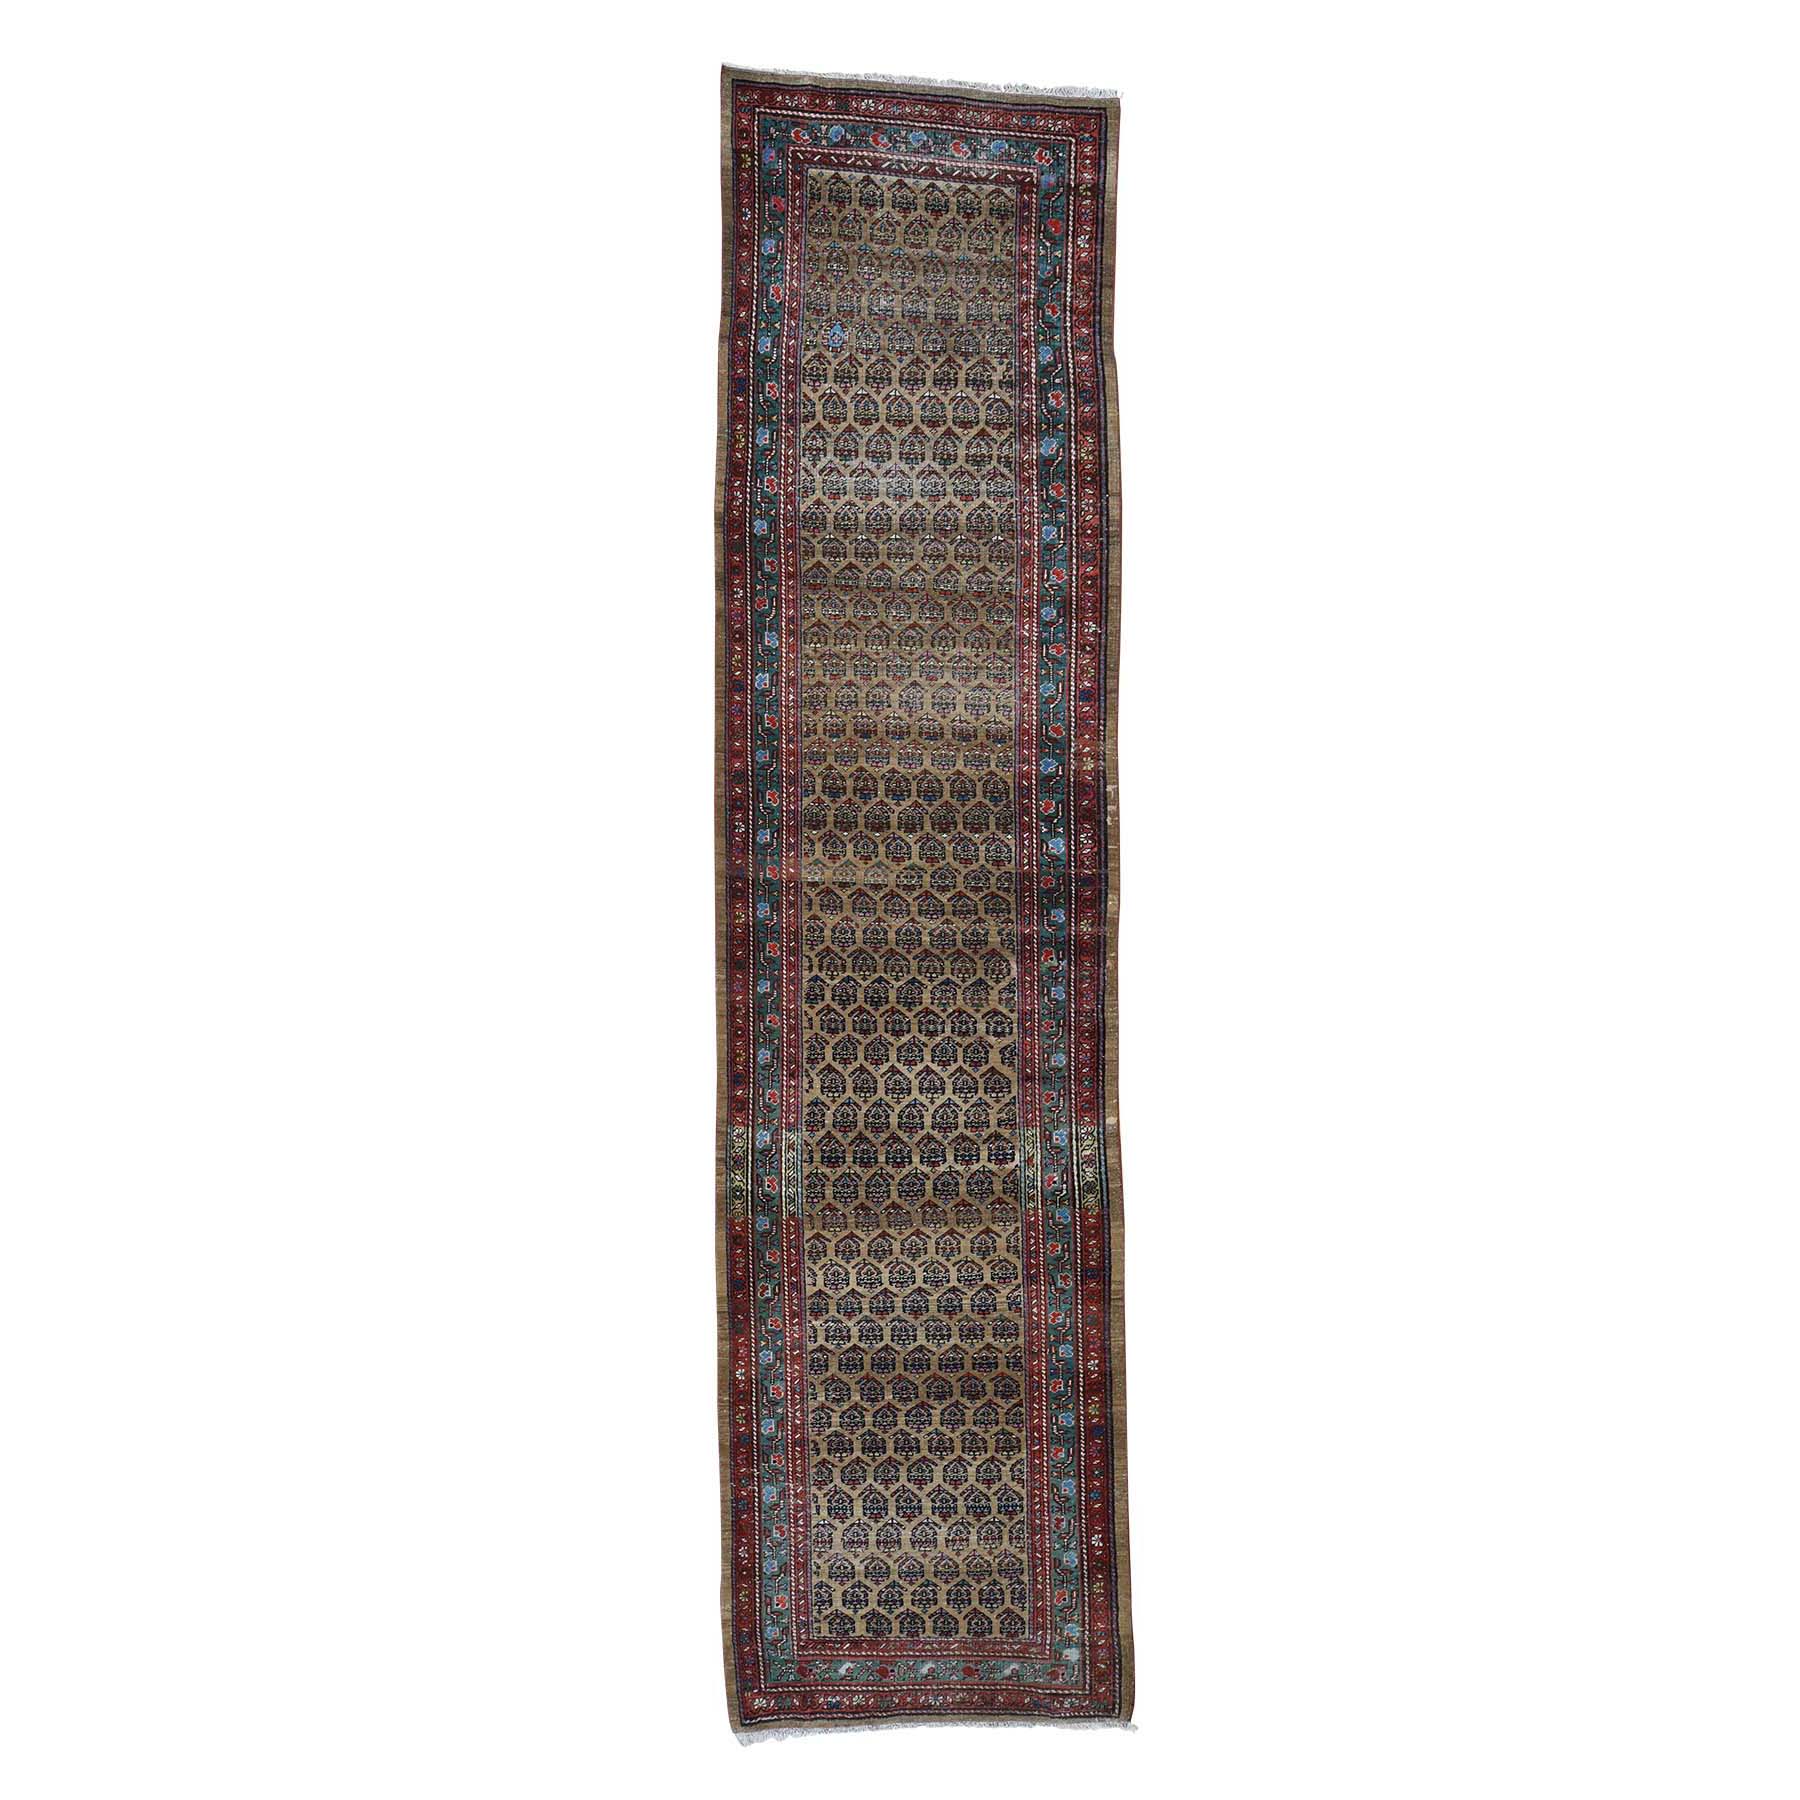 3'3"X13' Antique Persian Heriz Worn Pile Camel Hair Some Wear Runner Hand-Knotted Oriental Rug moad6dca